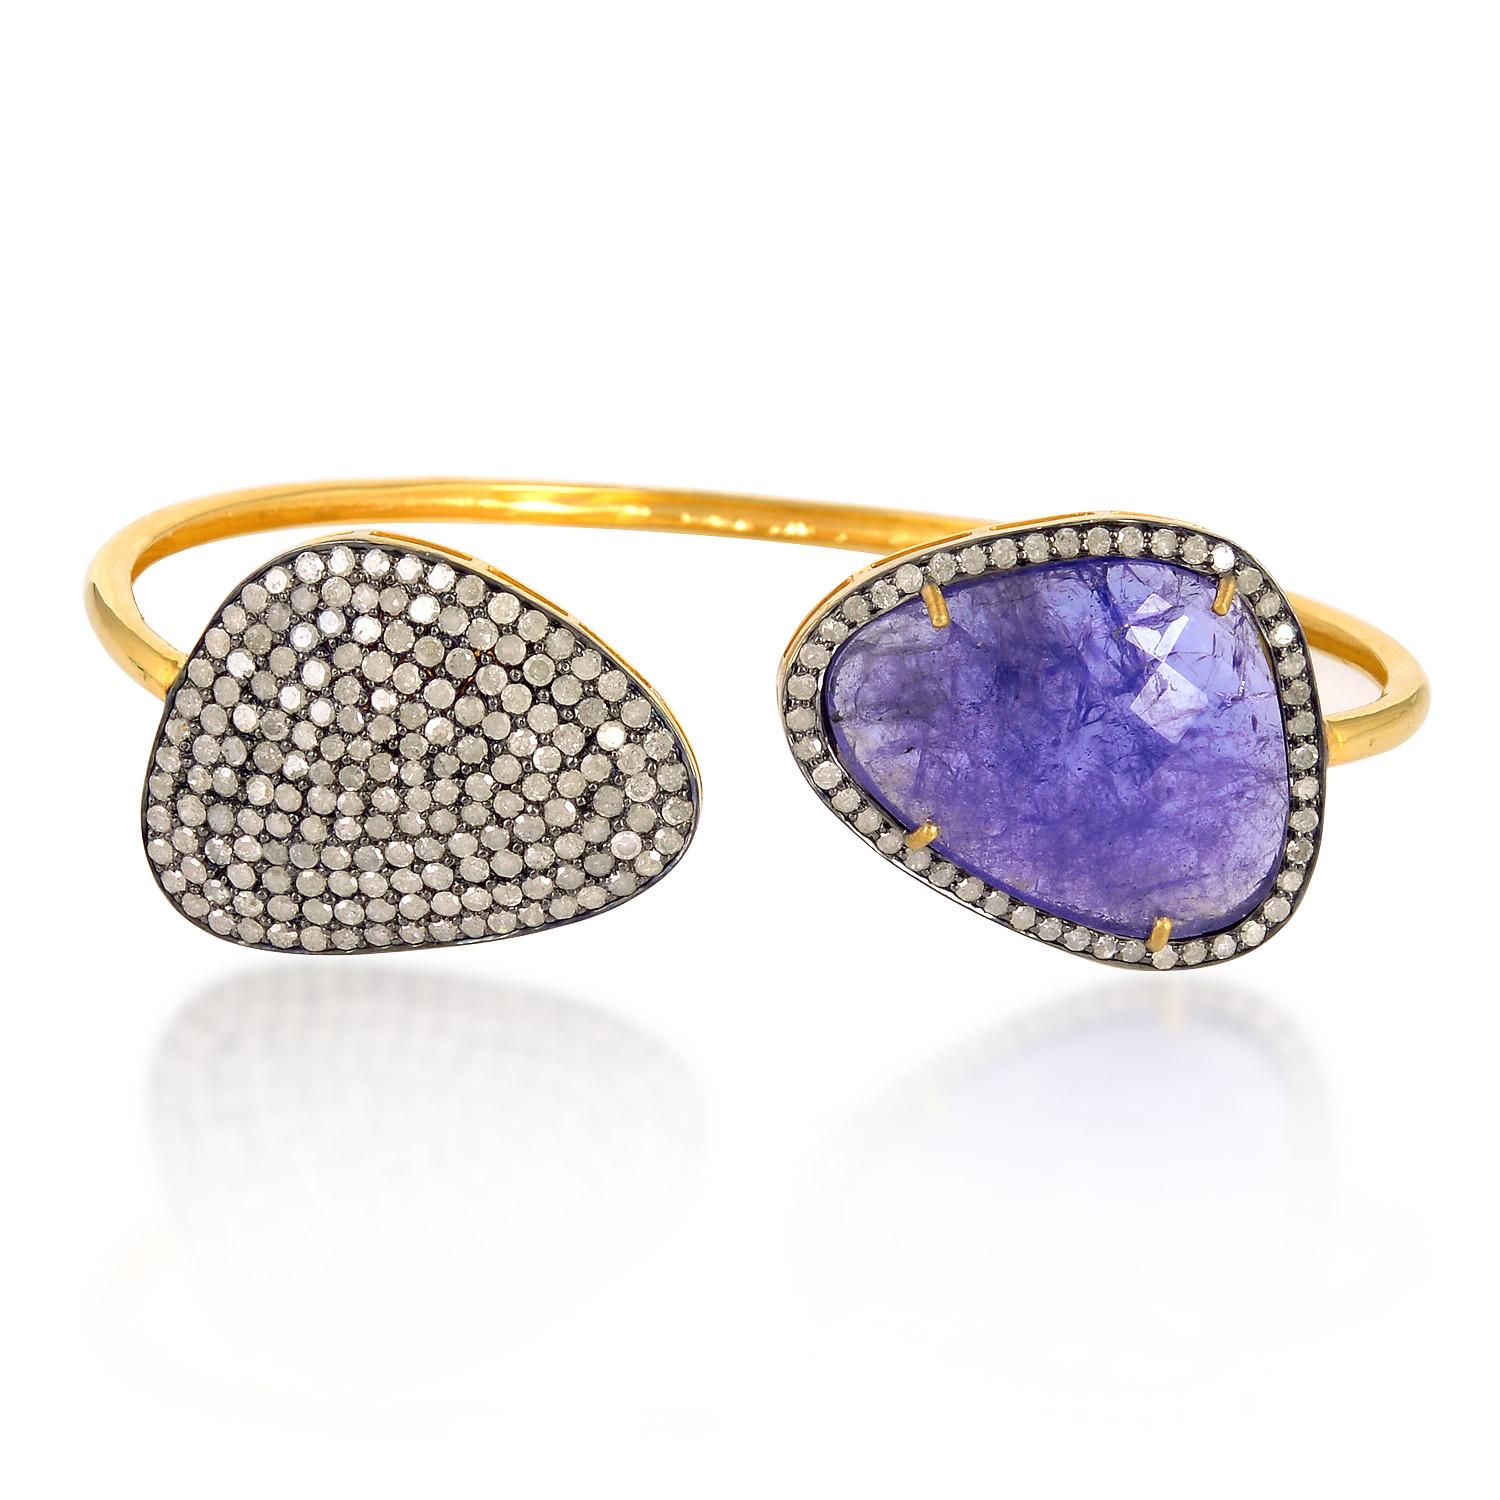 Tanzanite & Pave Diamond Adjustable Bangle Made In 18k Gold & Silver In New Condition For Sale In New York, NY